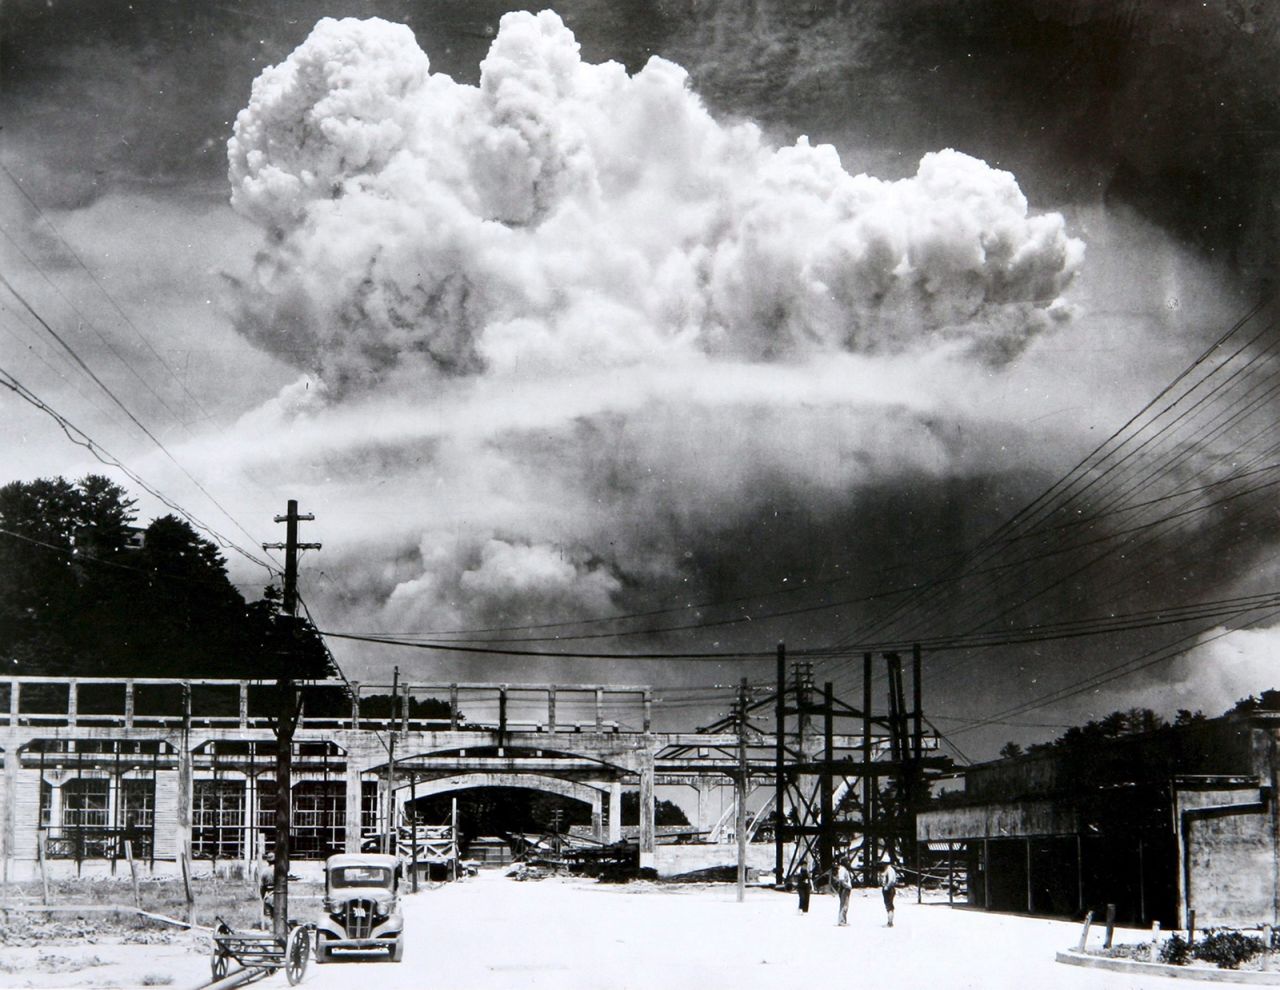 This photo was taken about six miles from the scene of the Nagasaki explosion. According to the Nagasaki Atomic Bomb Museum, photographer Hiromichi Matsuda took this 15 minutes after the attack.